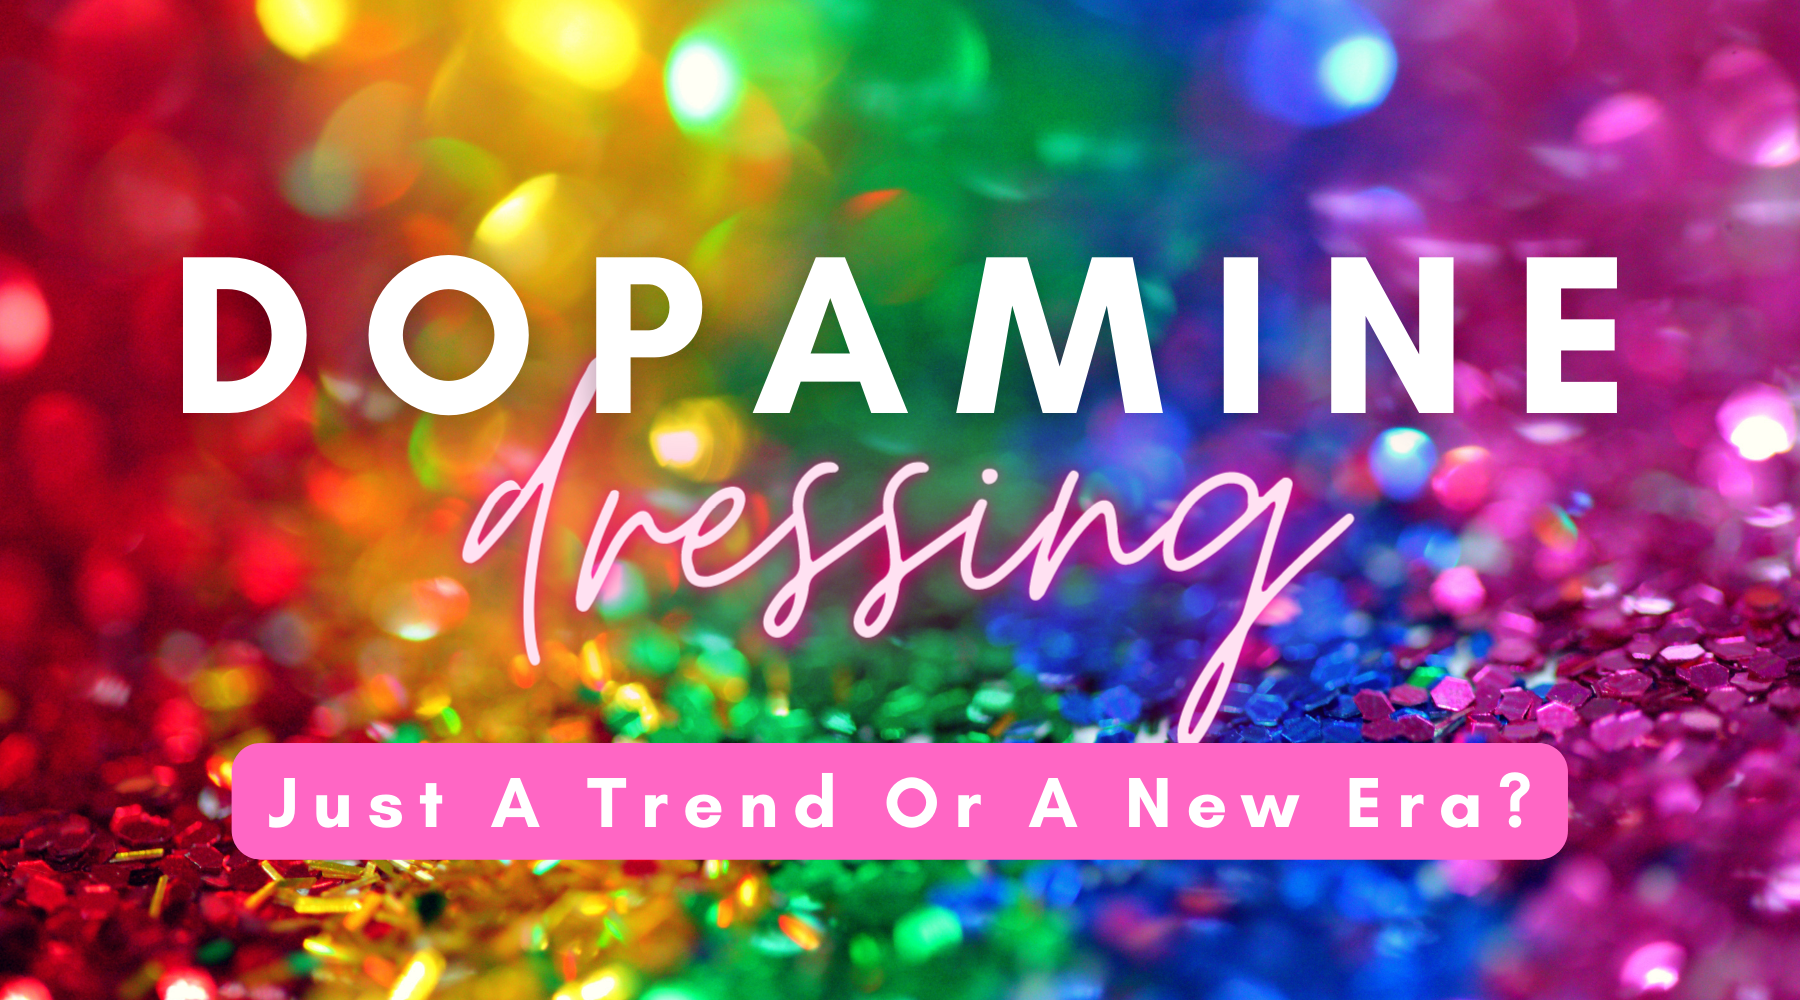 Dopamine Dressing: Just A Trend Or A New Era?